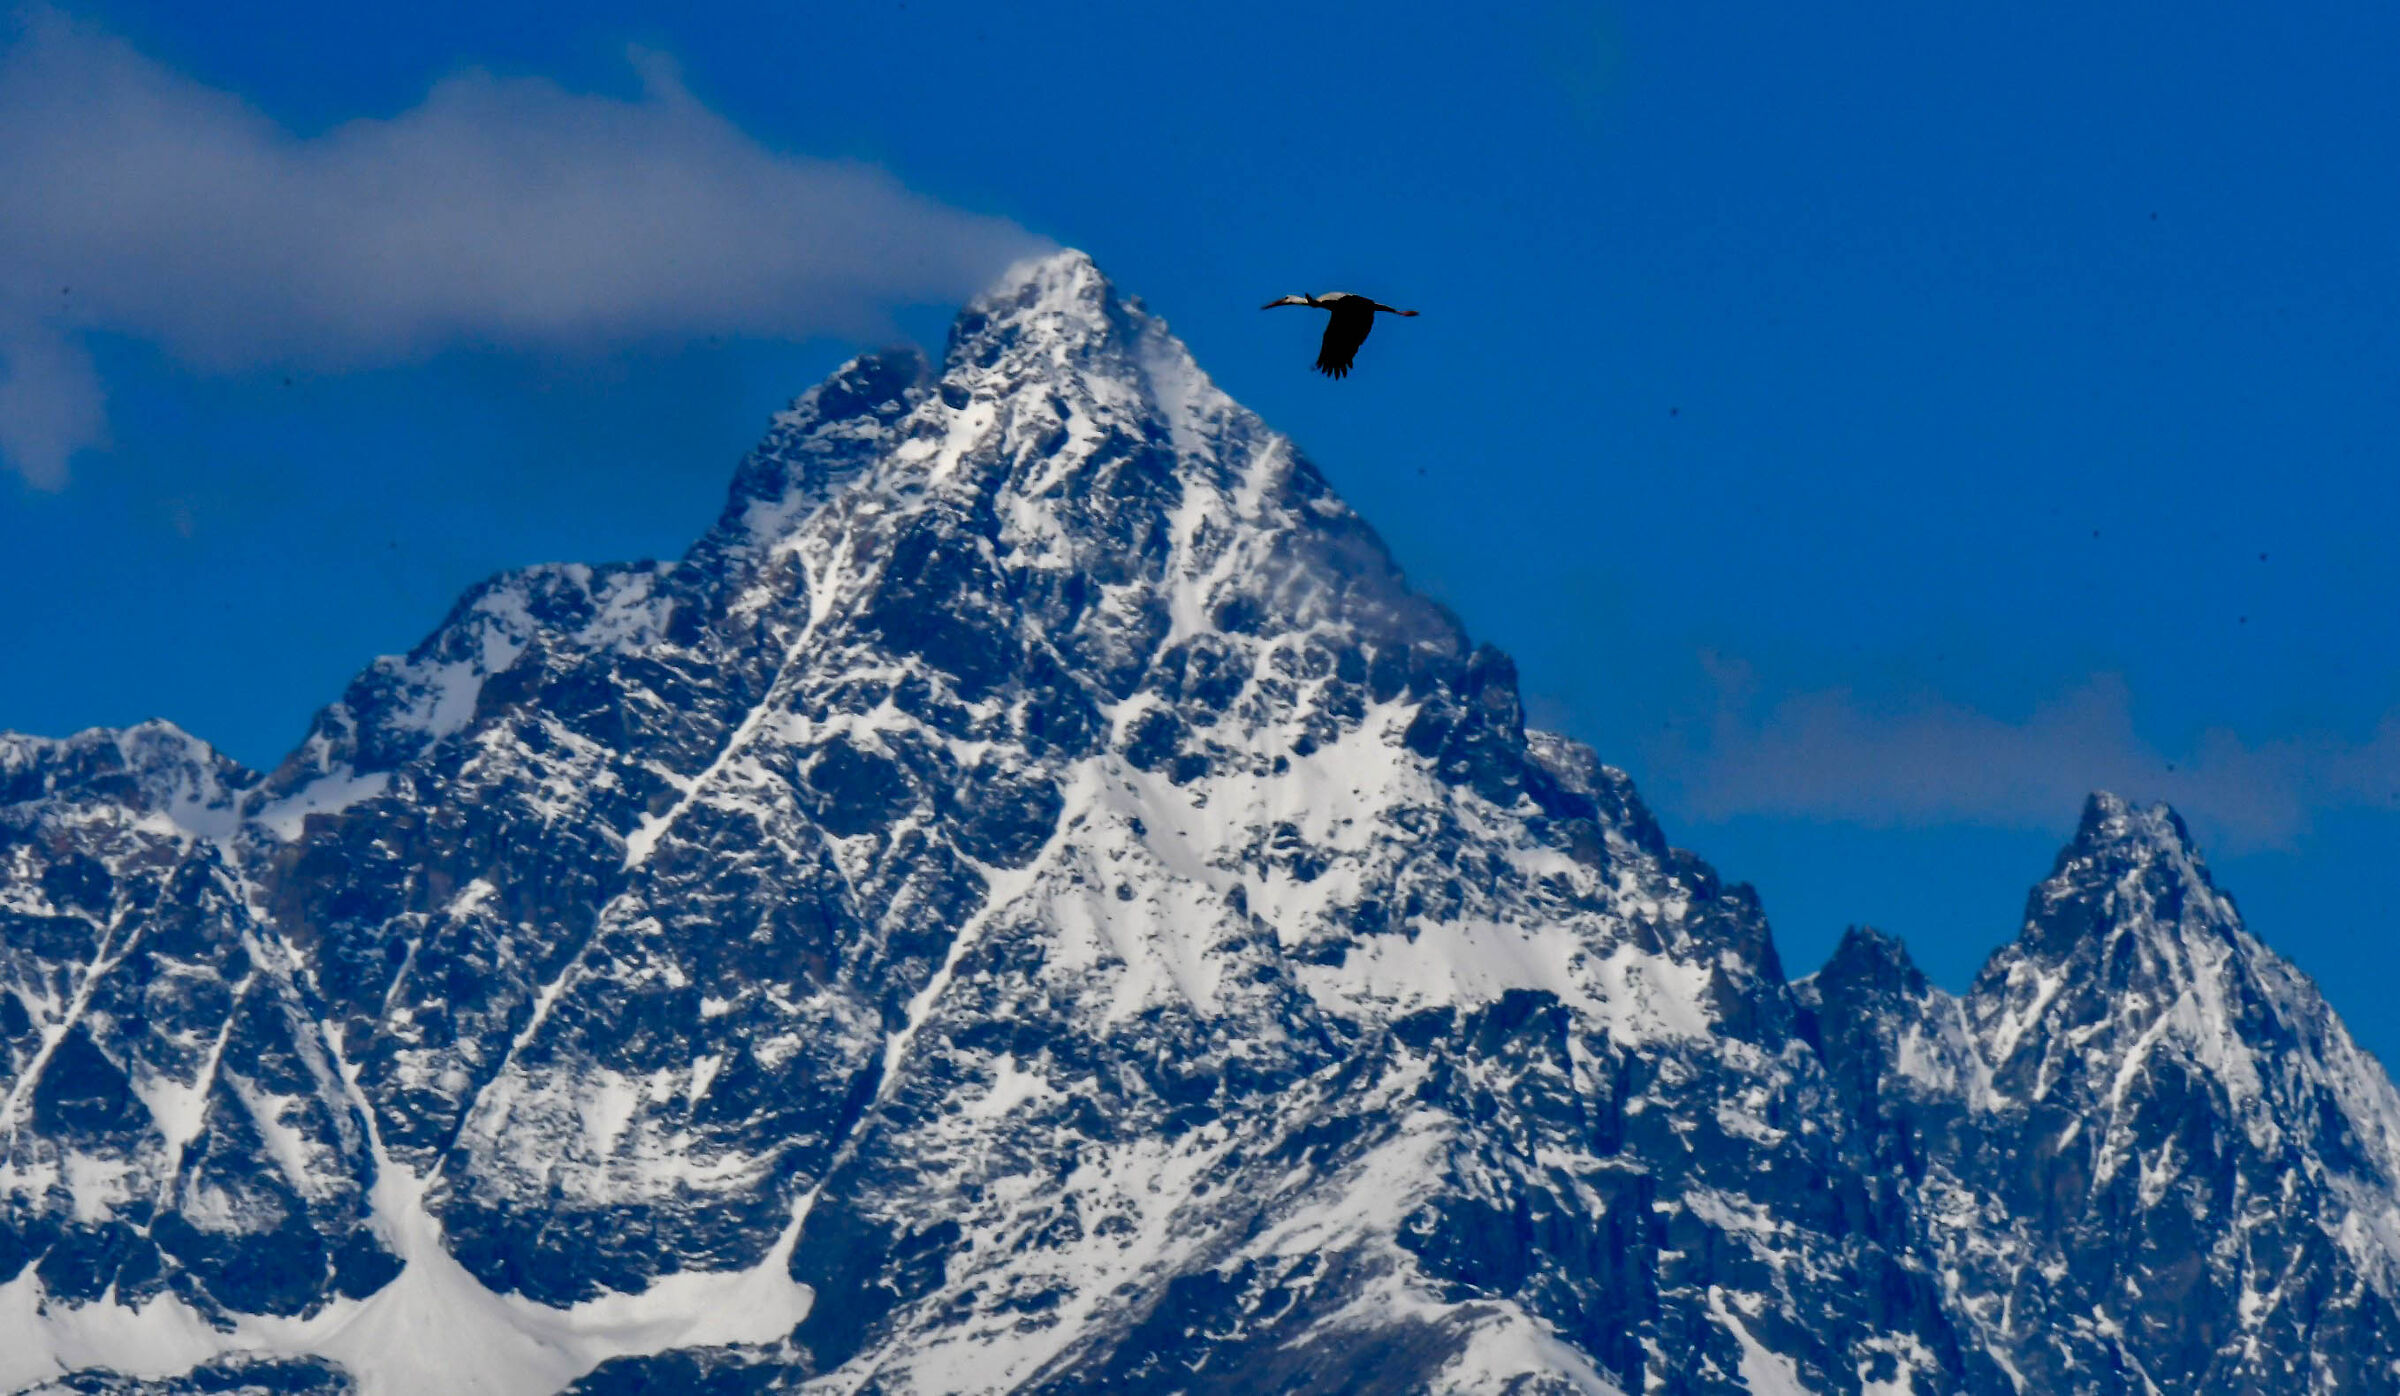 The stork and the monviso...